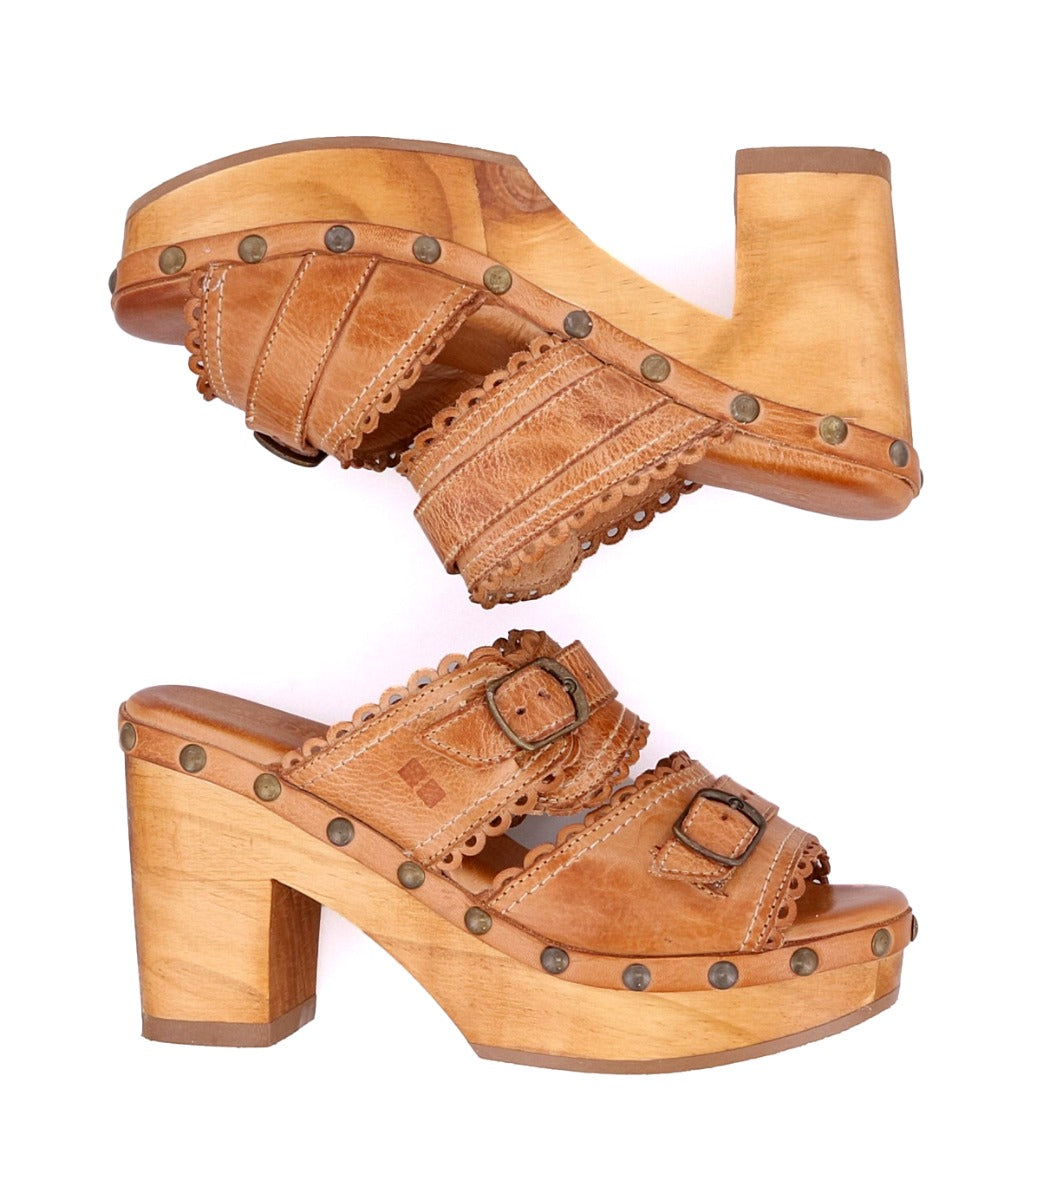 A pair of Poly sandals by Bed Stu with straps and buckles.